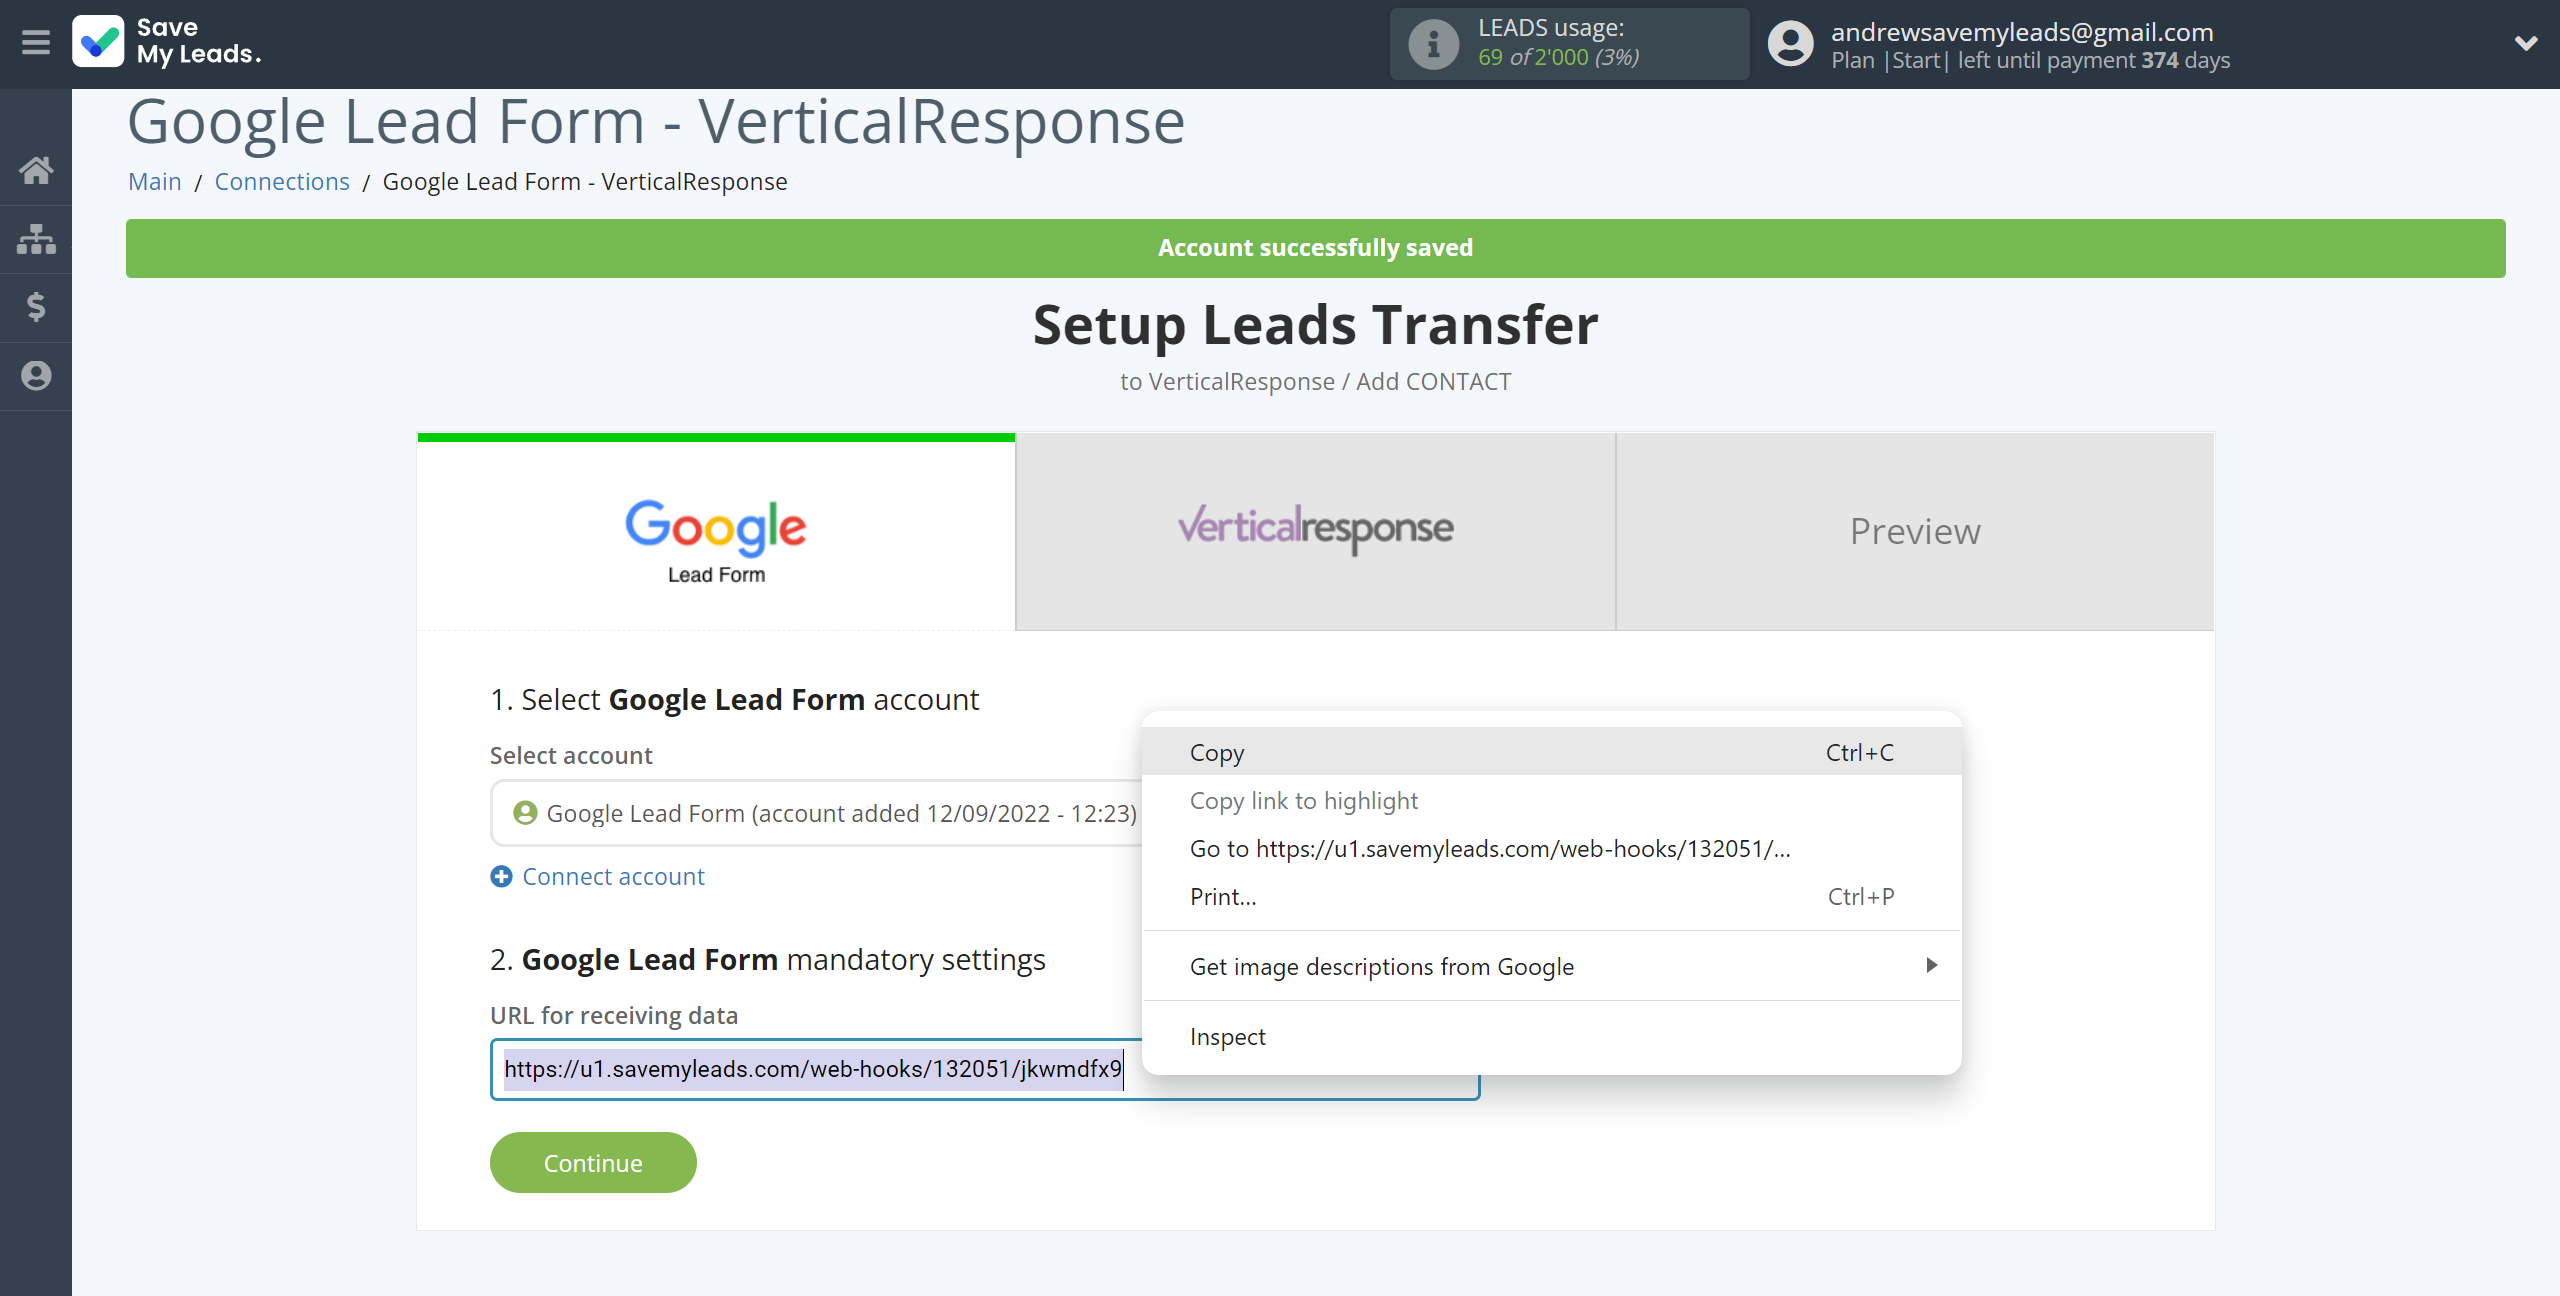 How to Connect Google Lead Form with VerticalResponse | Data Source account connection